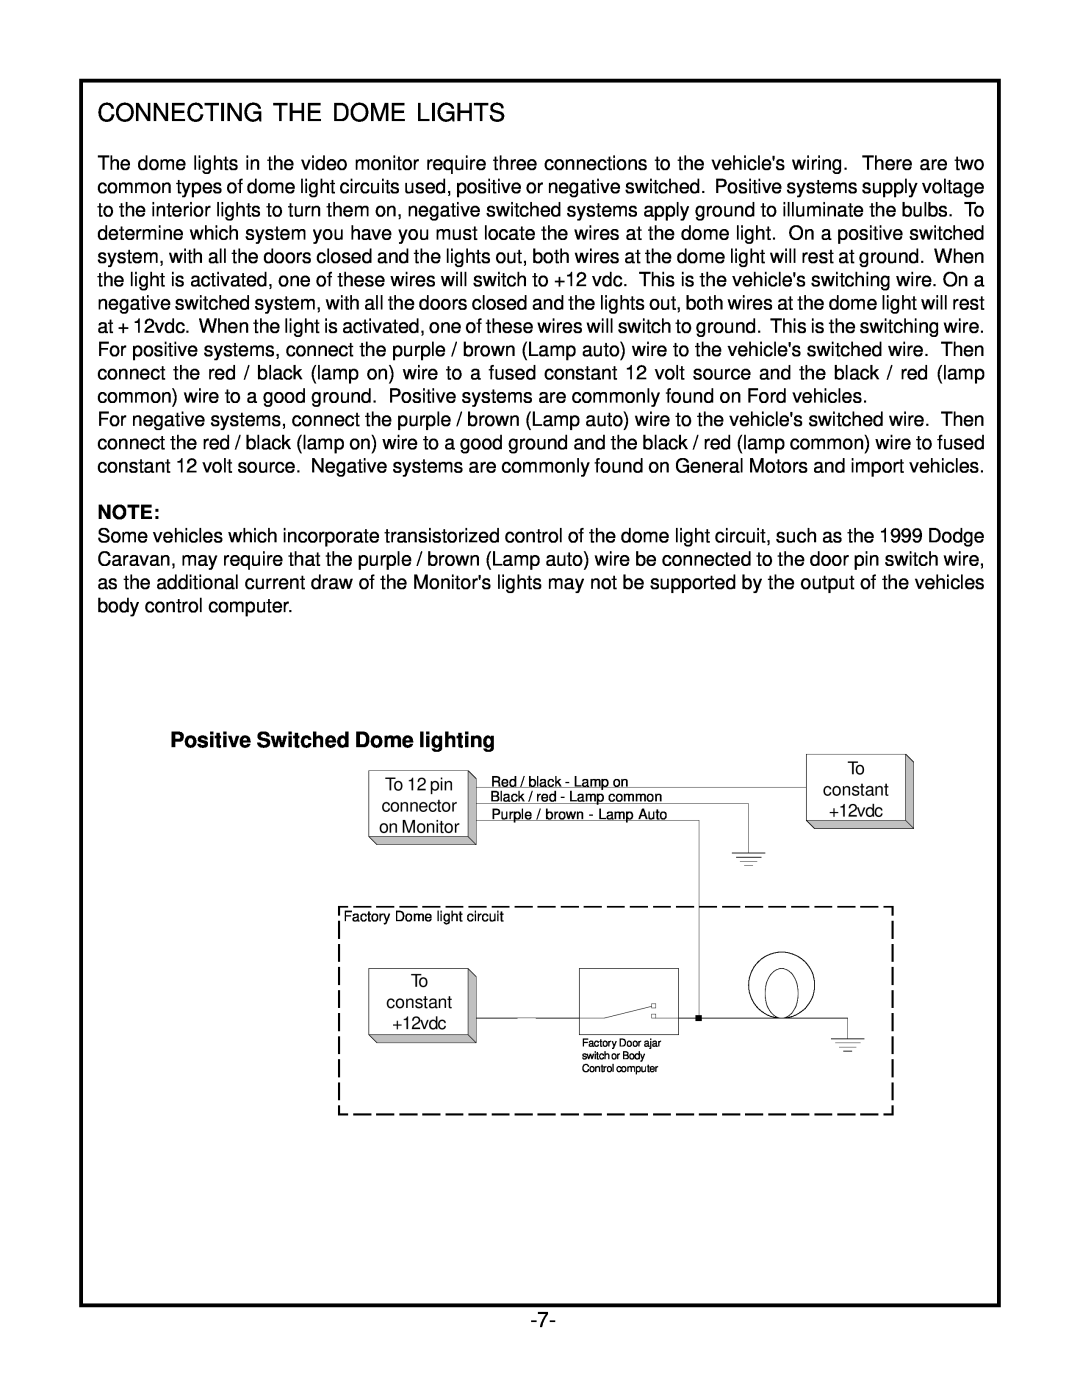 Audiovox VOD705 owner manual Positive Switched Dome lighting, Connecting The Dome Lights 